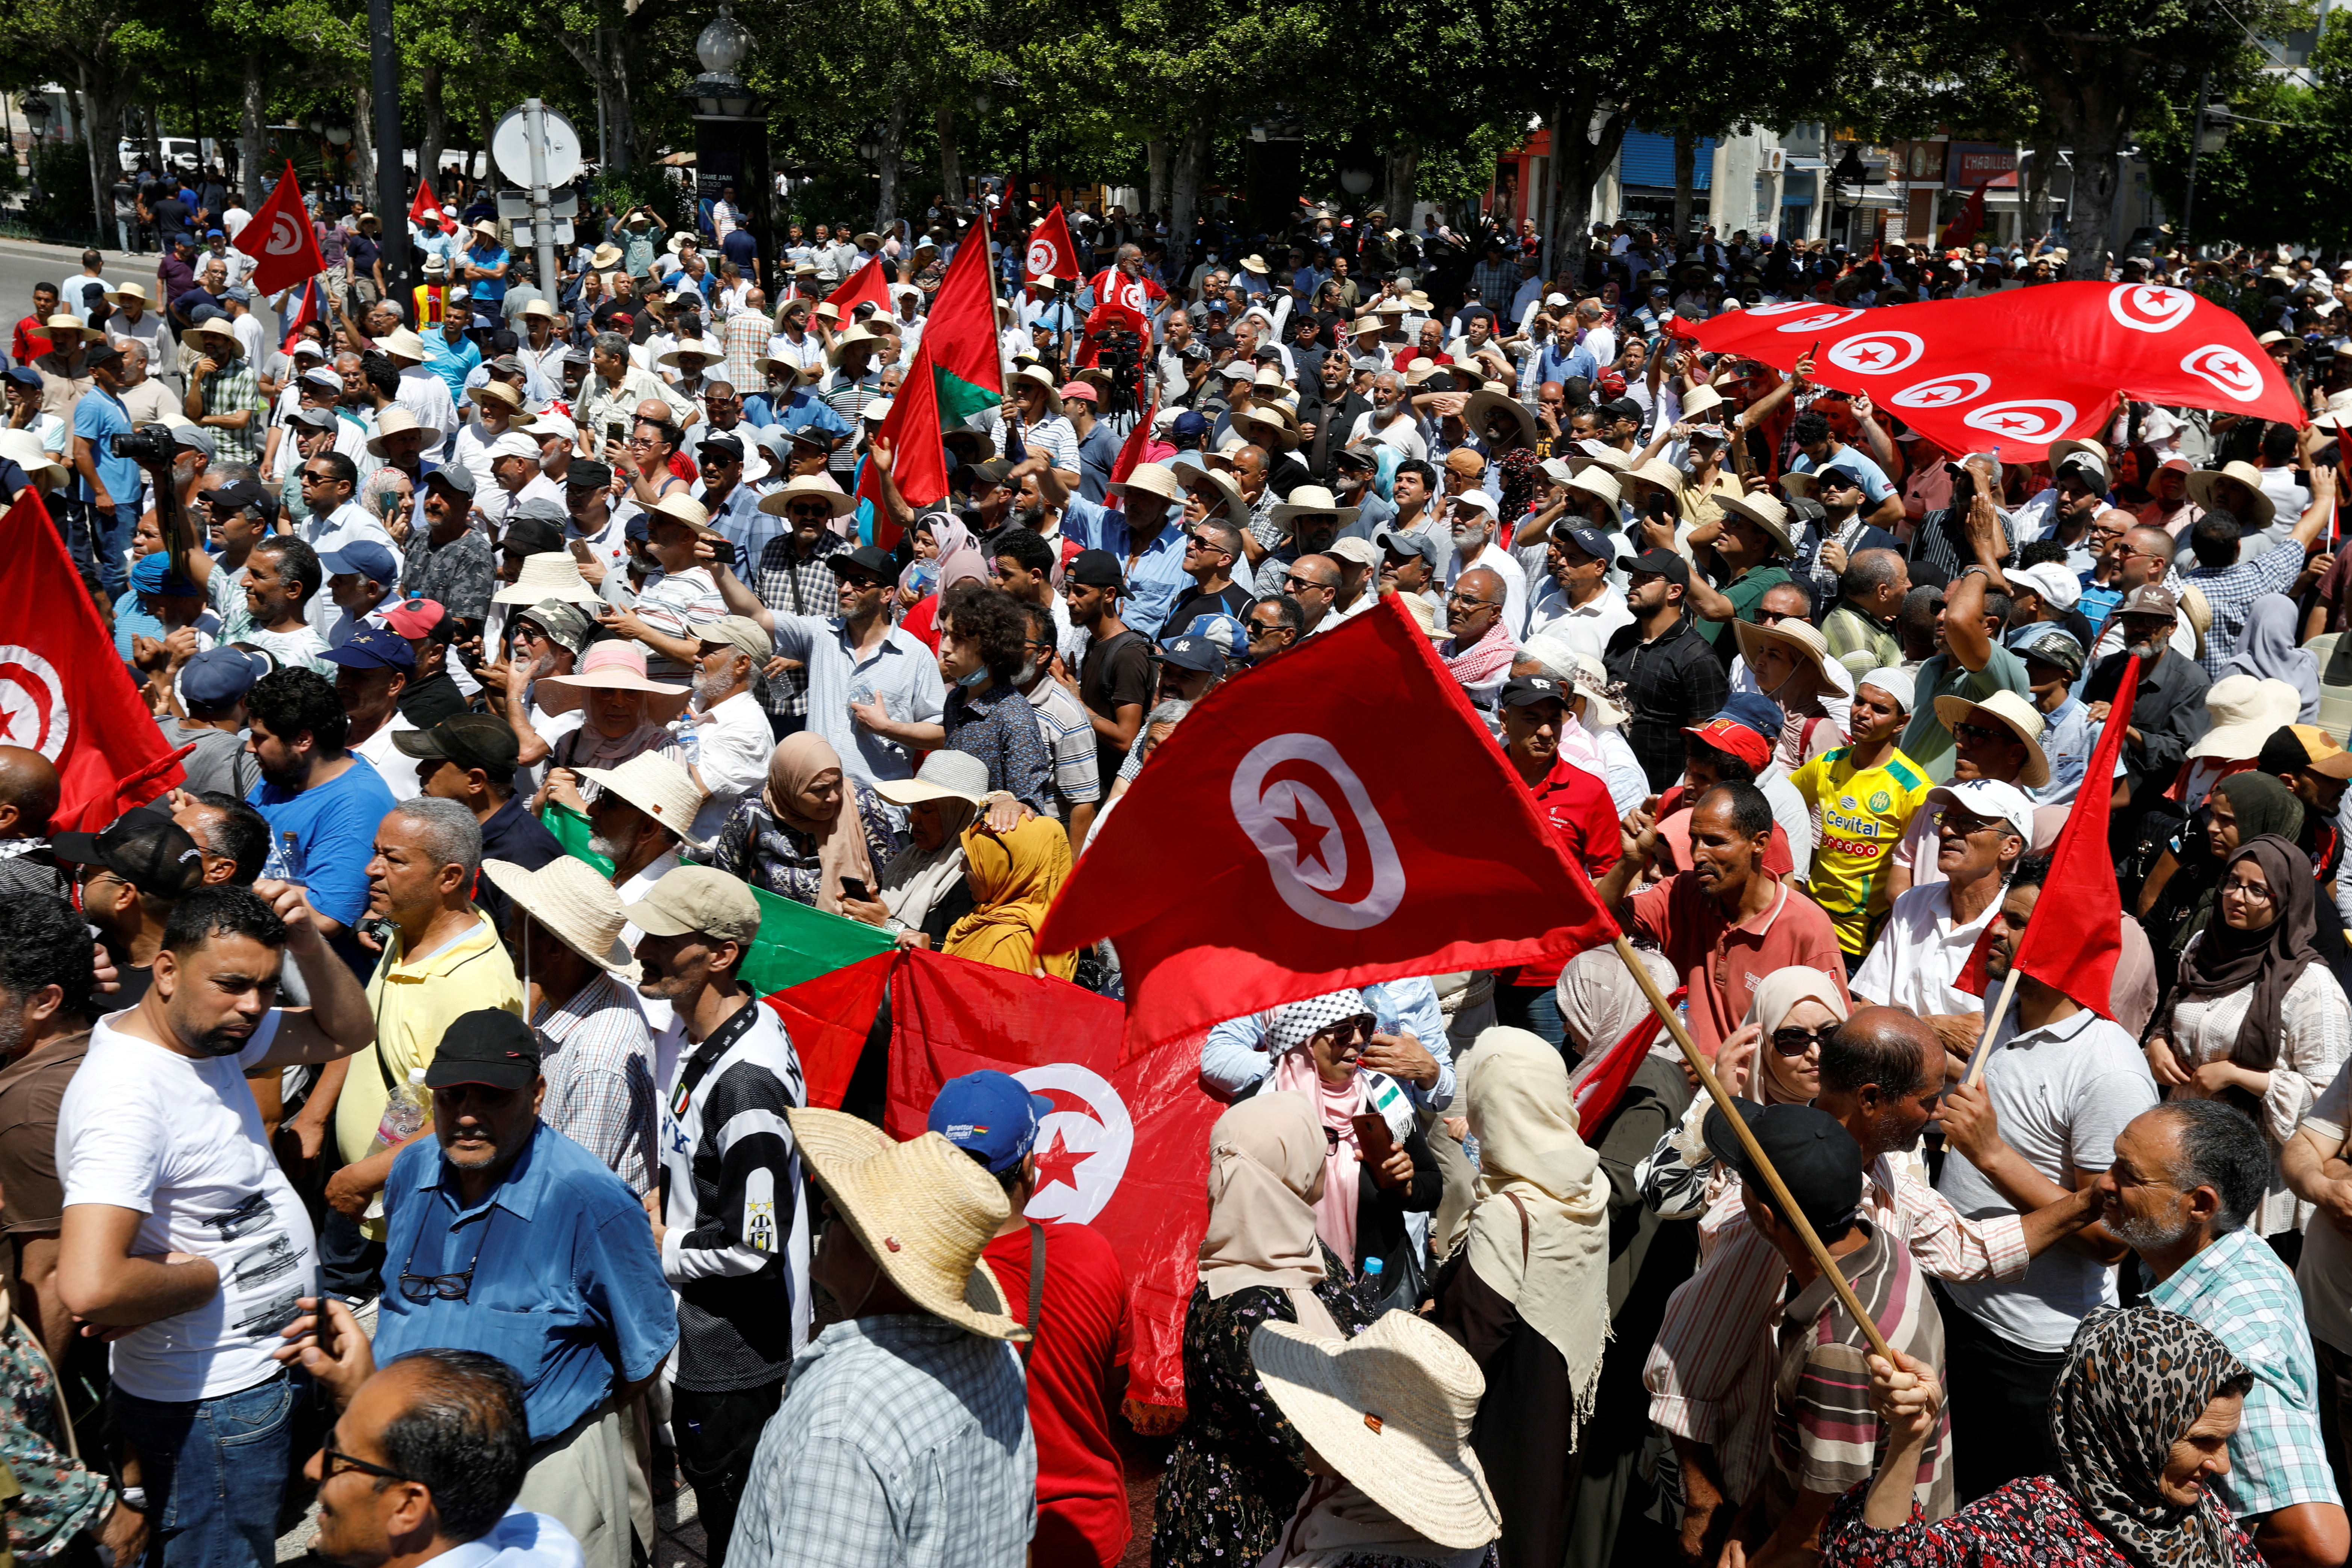 Protest against Tunisian President Saied, in Tunis